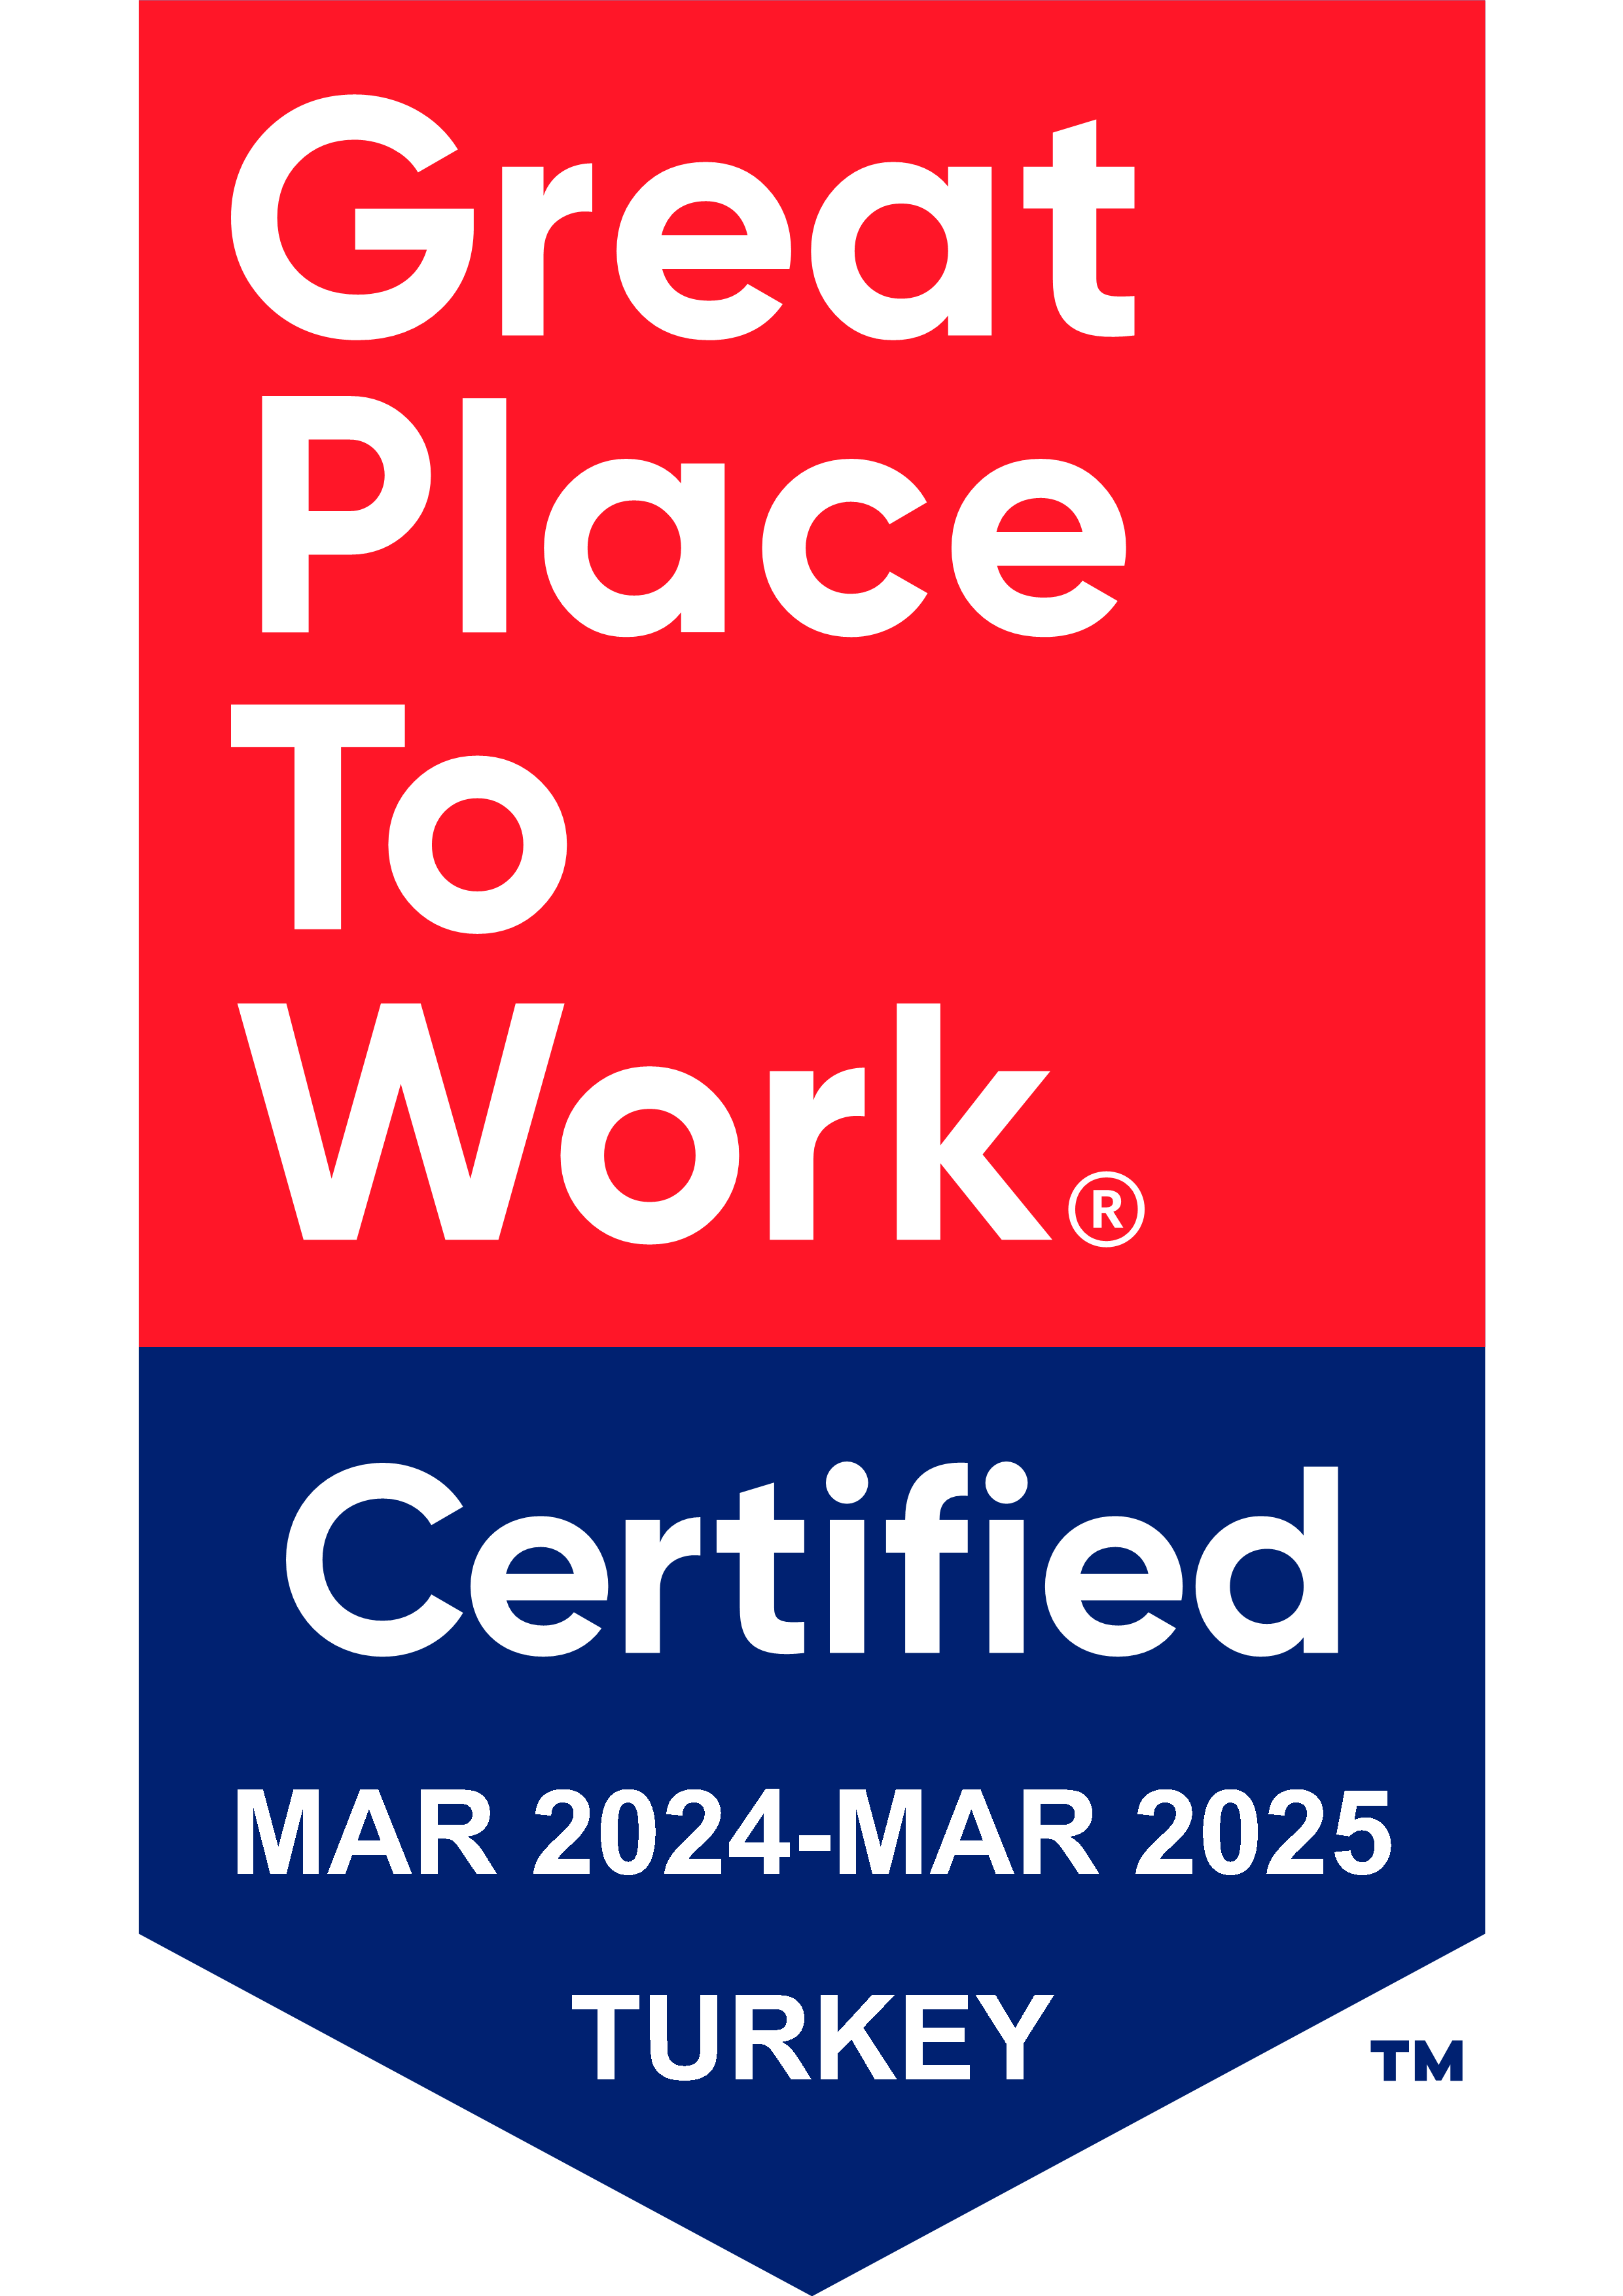 Great Place to Work - Certified